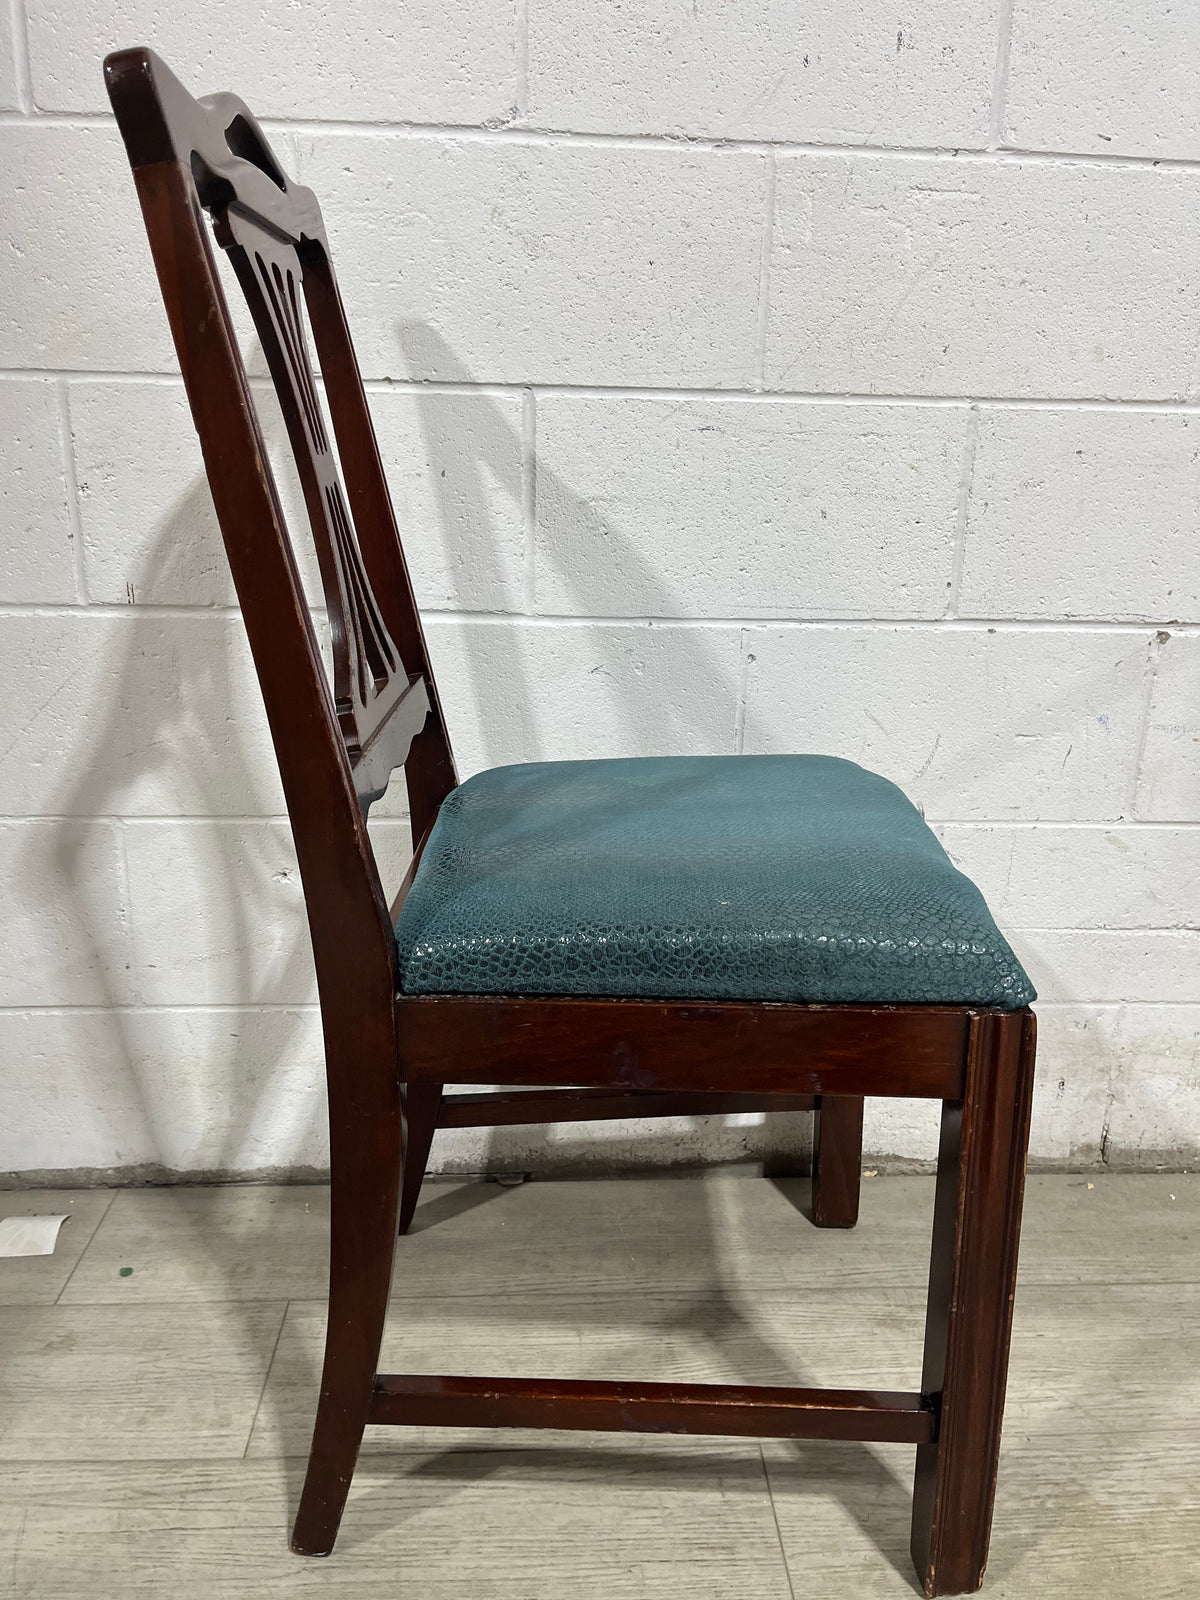 Set of 4 Turquoise Reptile Skin Dining Chairs